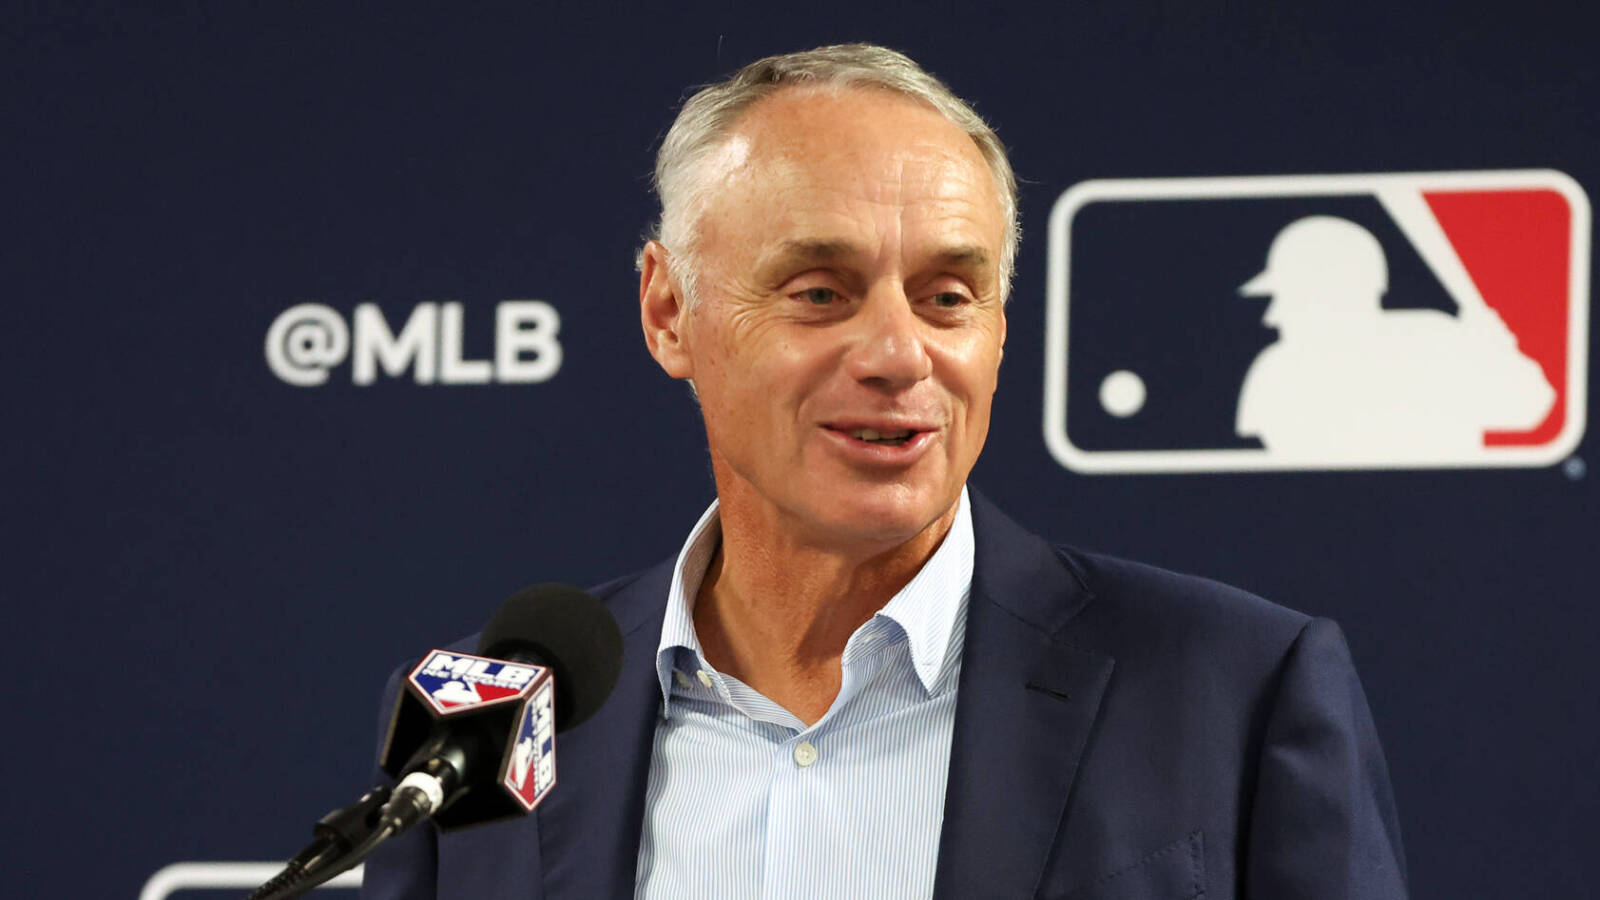 MLB announces partnership with Roku for Sunday broadcasts